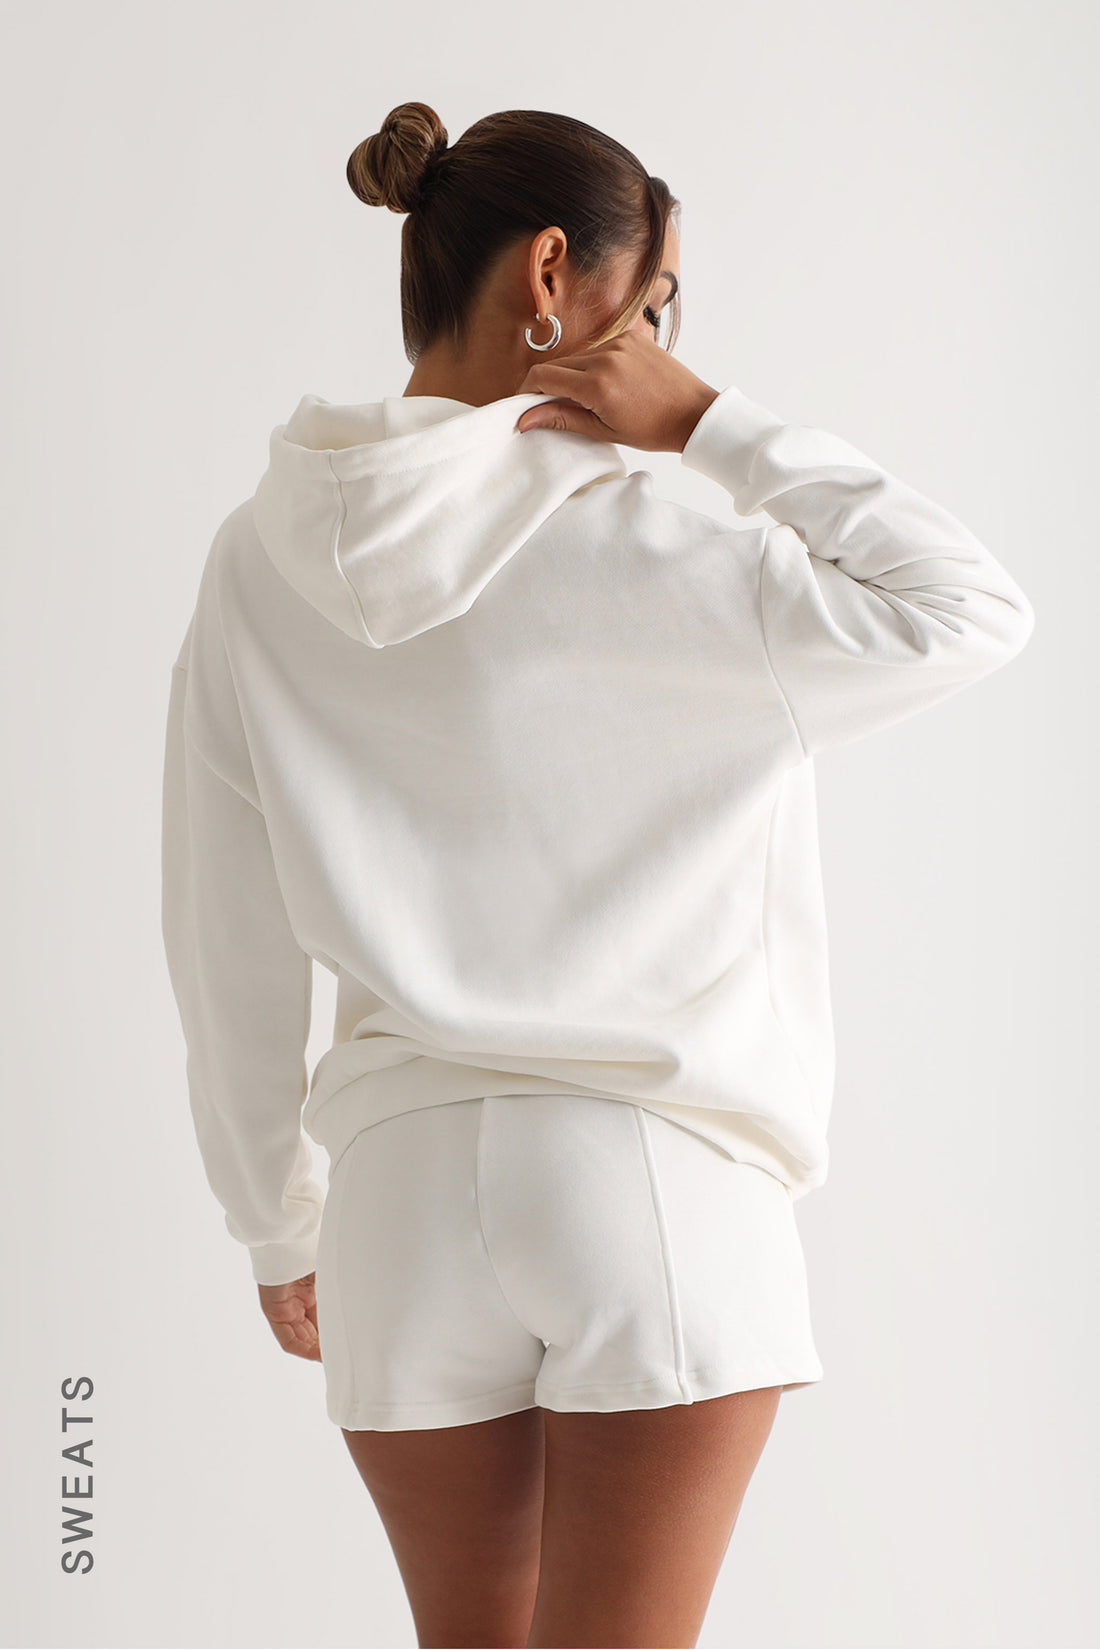 Relaxed Fit Hoodie - White